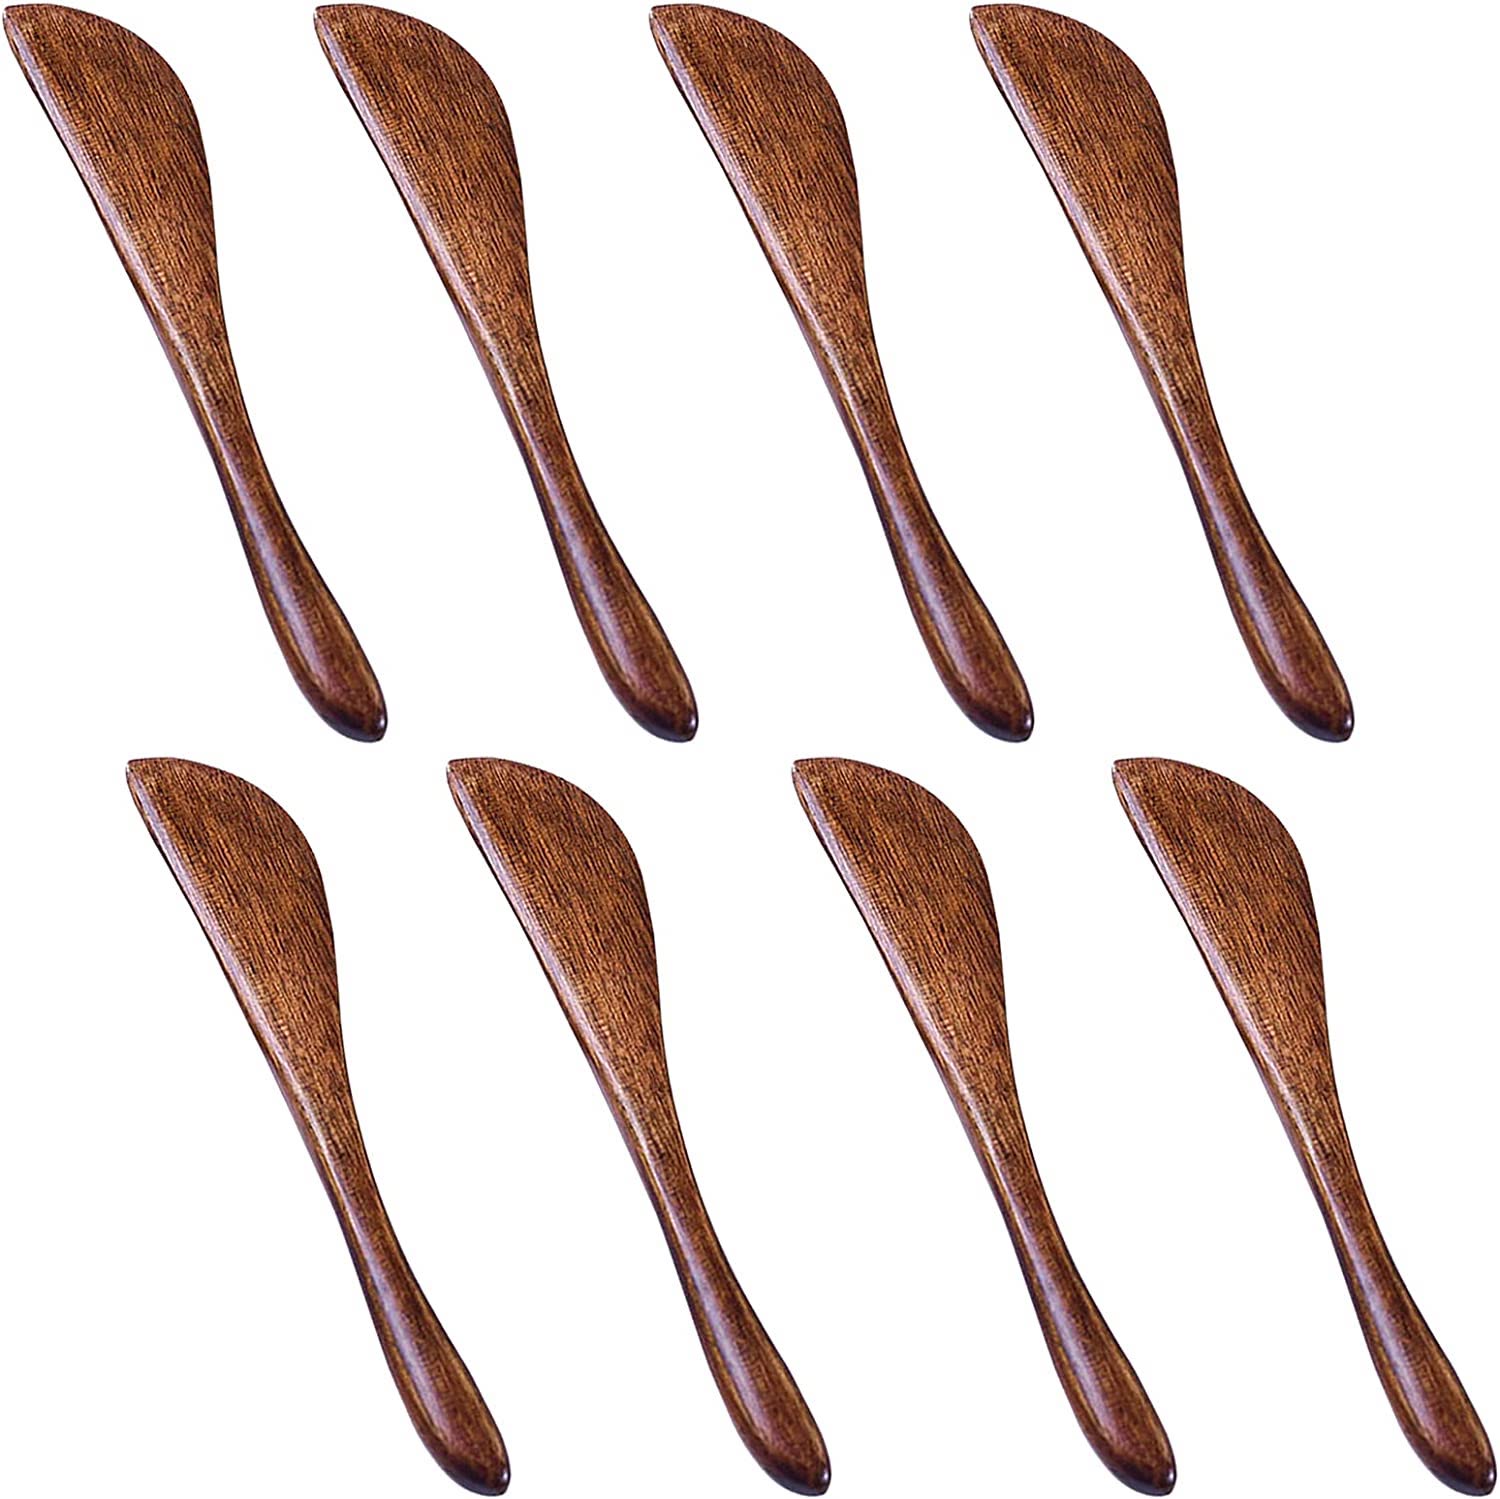 Butter knives in wood